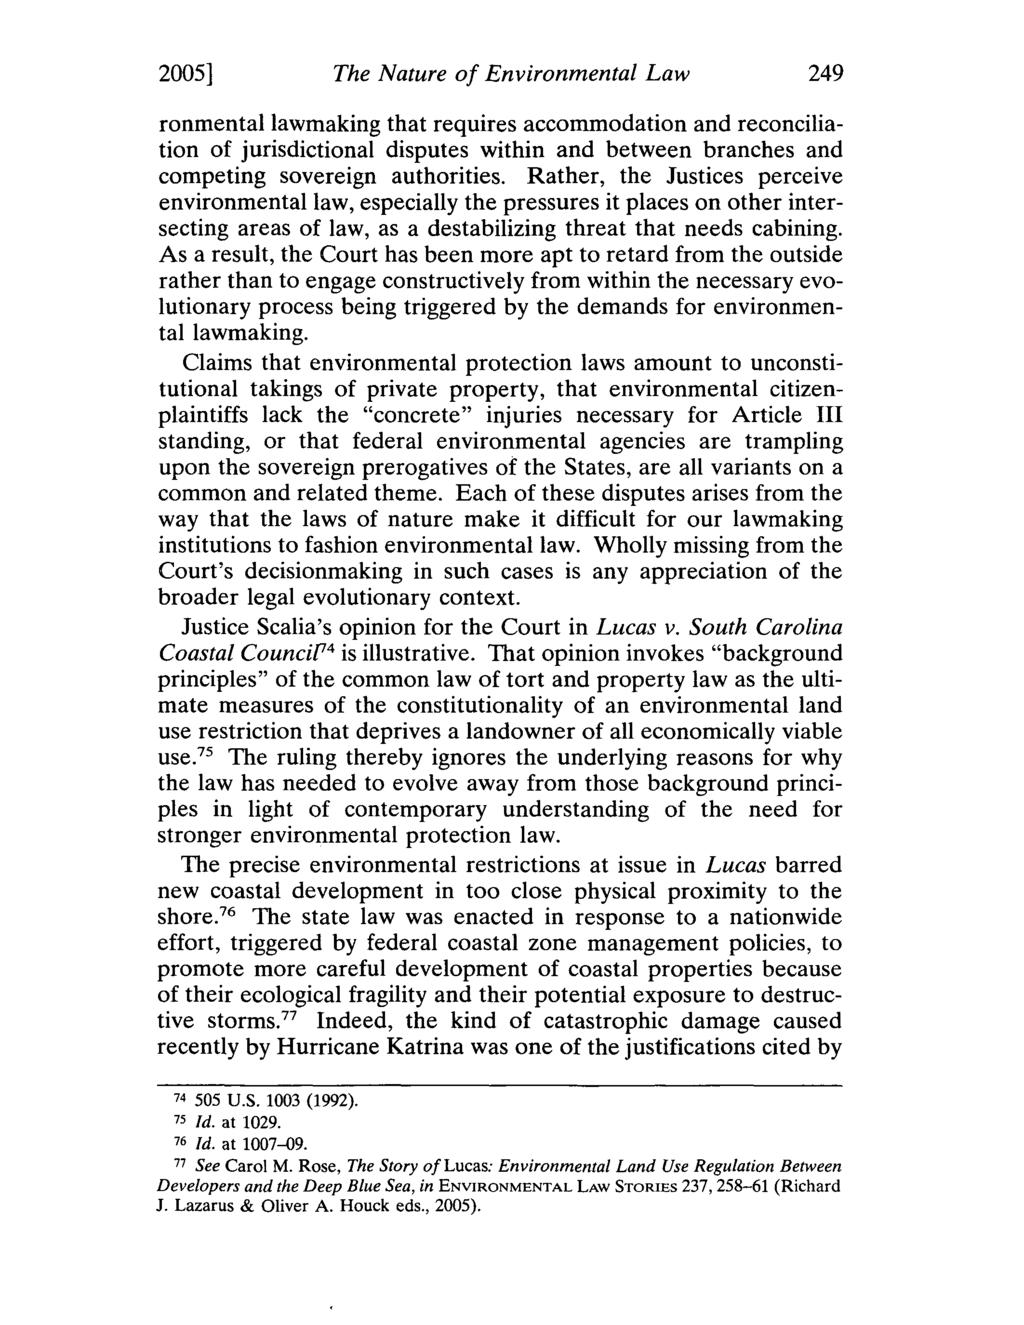 2005] The Nature of Environmental Law 249 ronmentallawmaking that requires accommodation and reconciliation of jurisdictional disputes within and between branches and competing sovereign authorities.